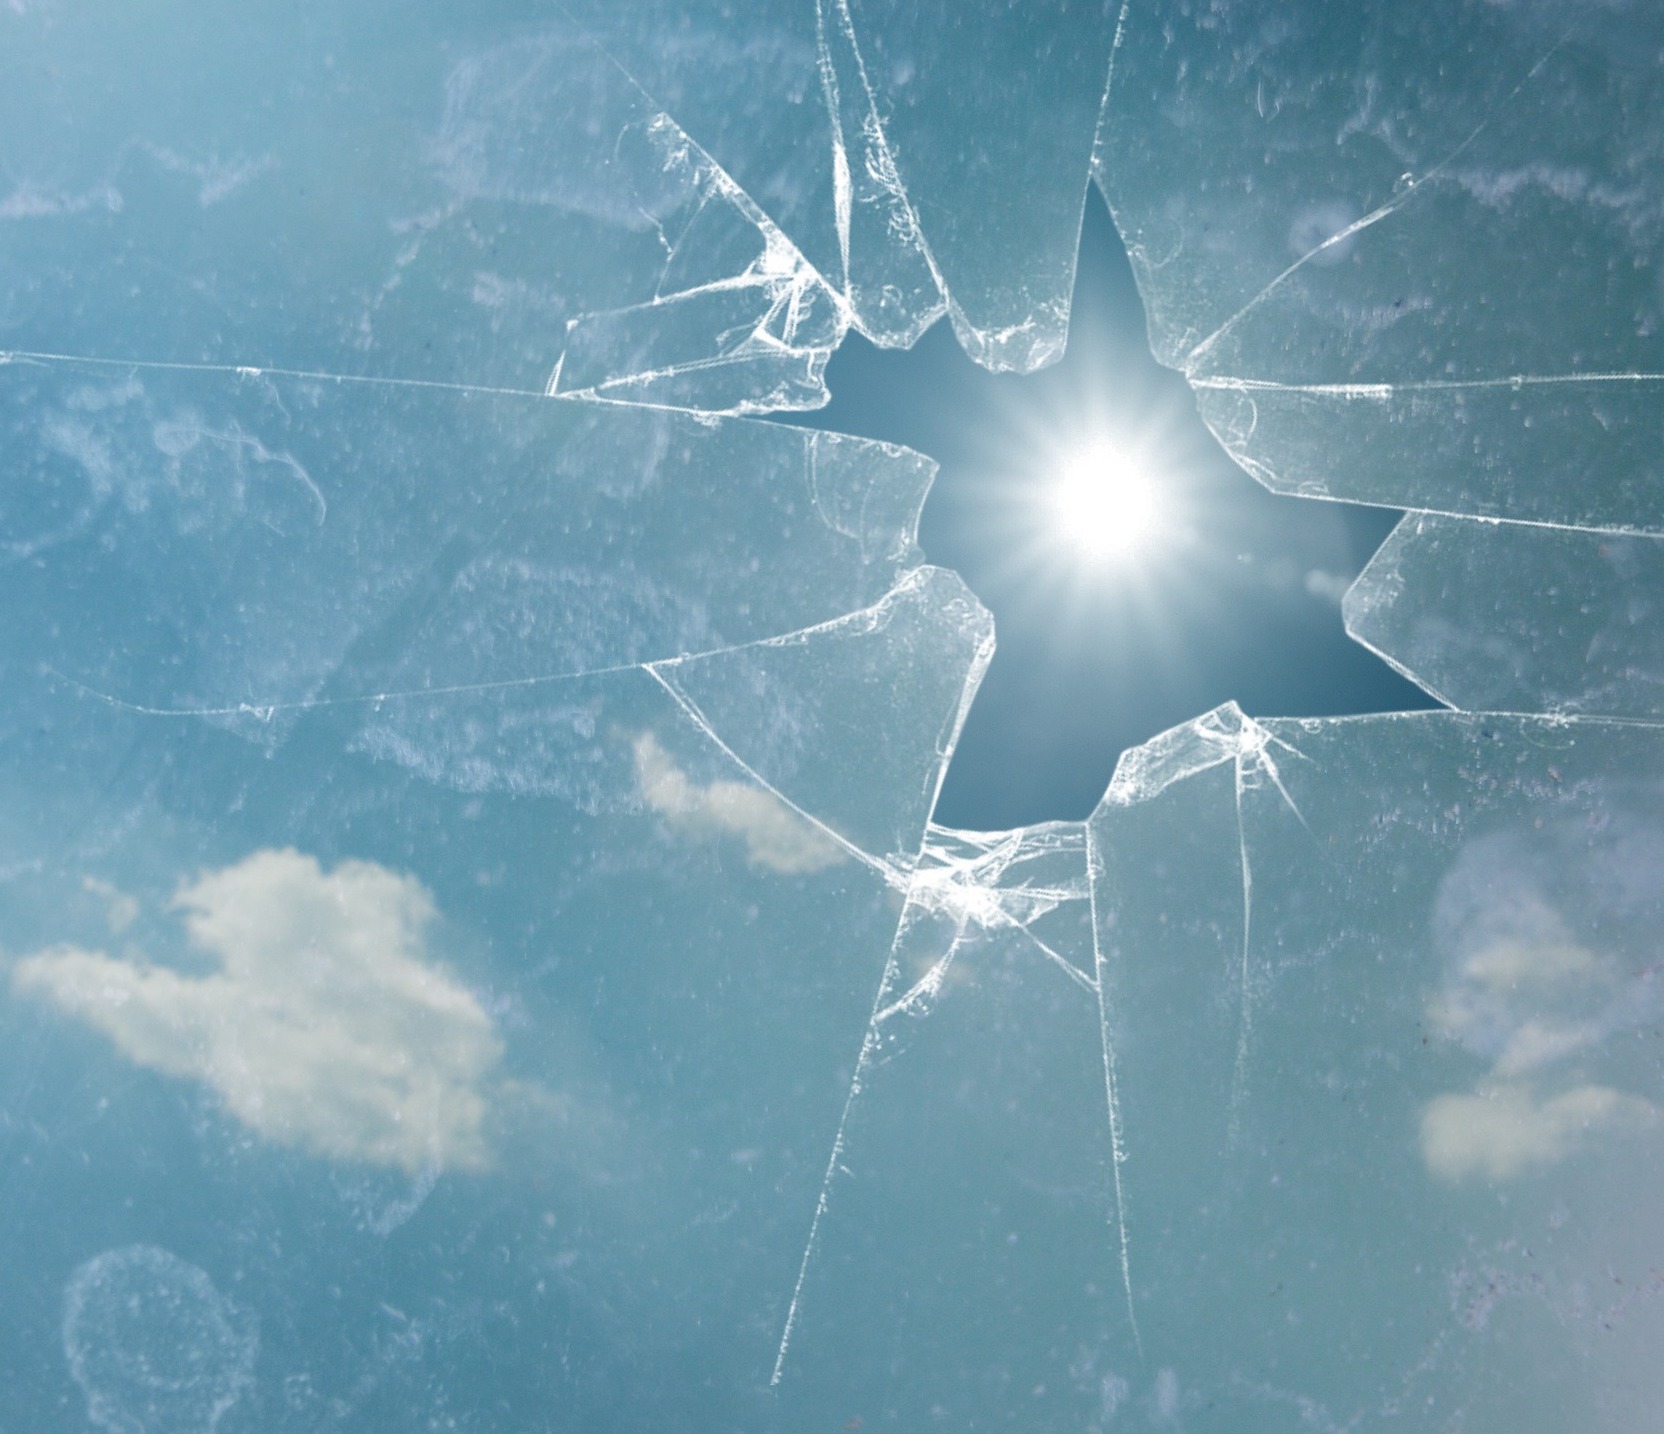 Photo. The sun shines brightly in a blue sky, viewed through a broken glass window.